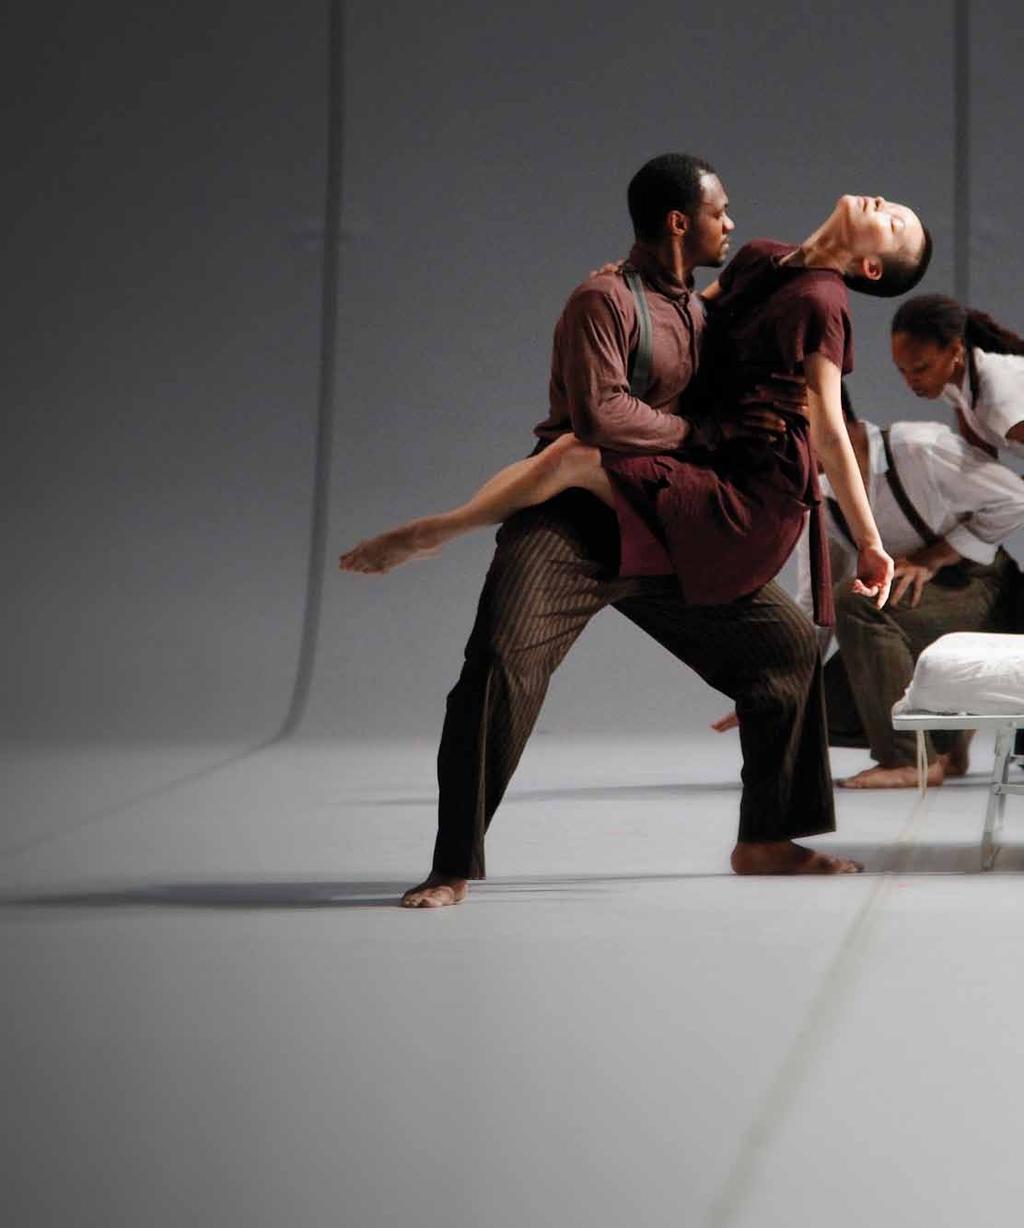 2015-16 Touring Season The Bill T. Jones/Arnie Zane Dance Company, Live Arts resident dance company, embarks on an ambitious touring season with two world premieres and four repertory programs.